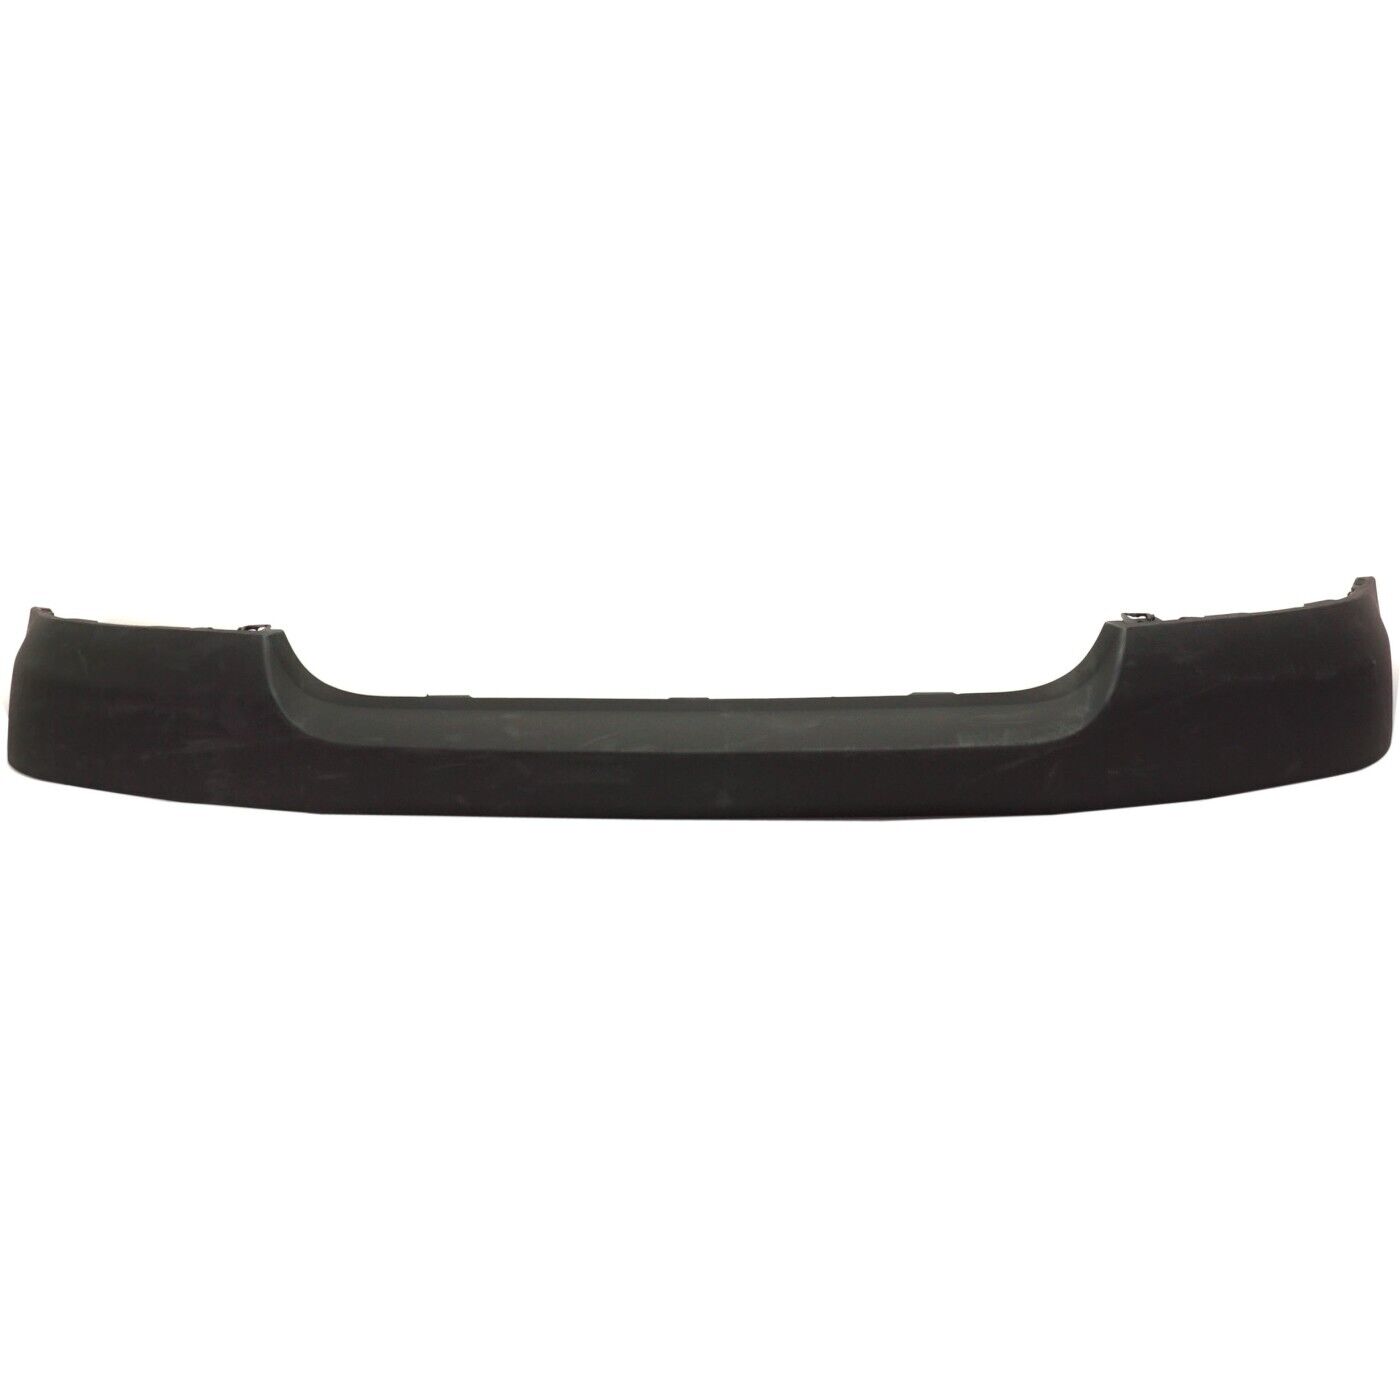 2006-2008 FORD F-150; Front Bumper Cover Upper XL; Painted to Match